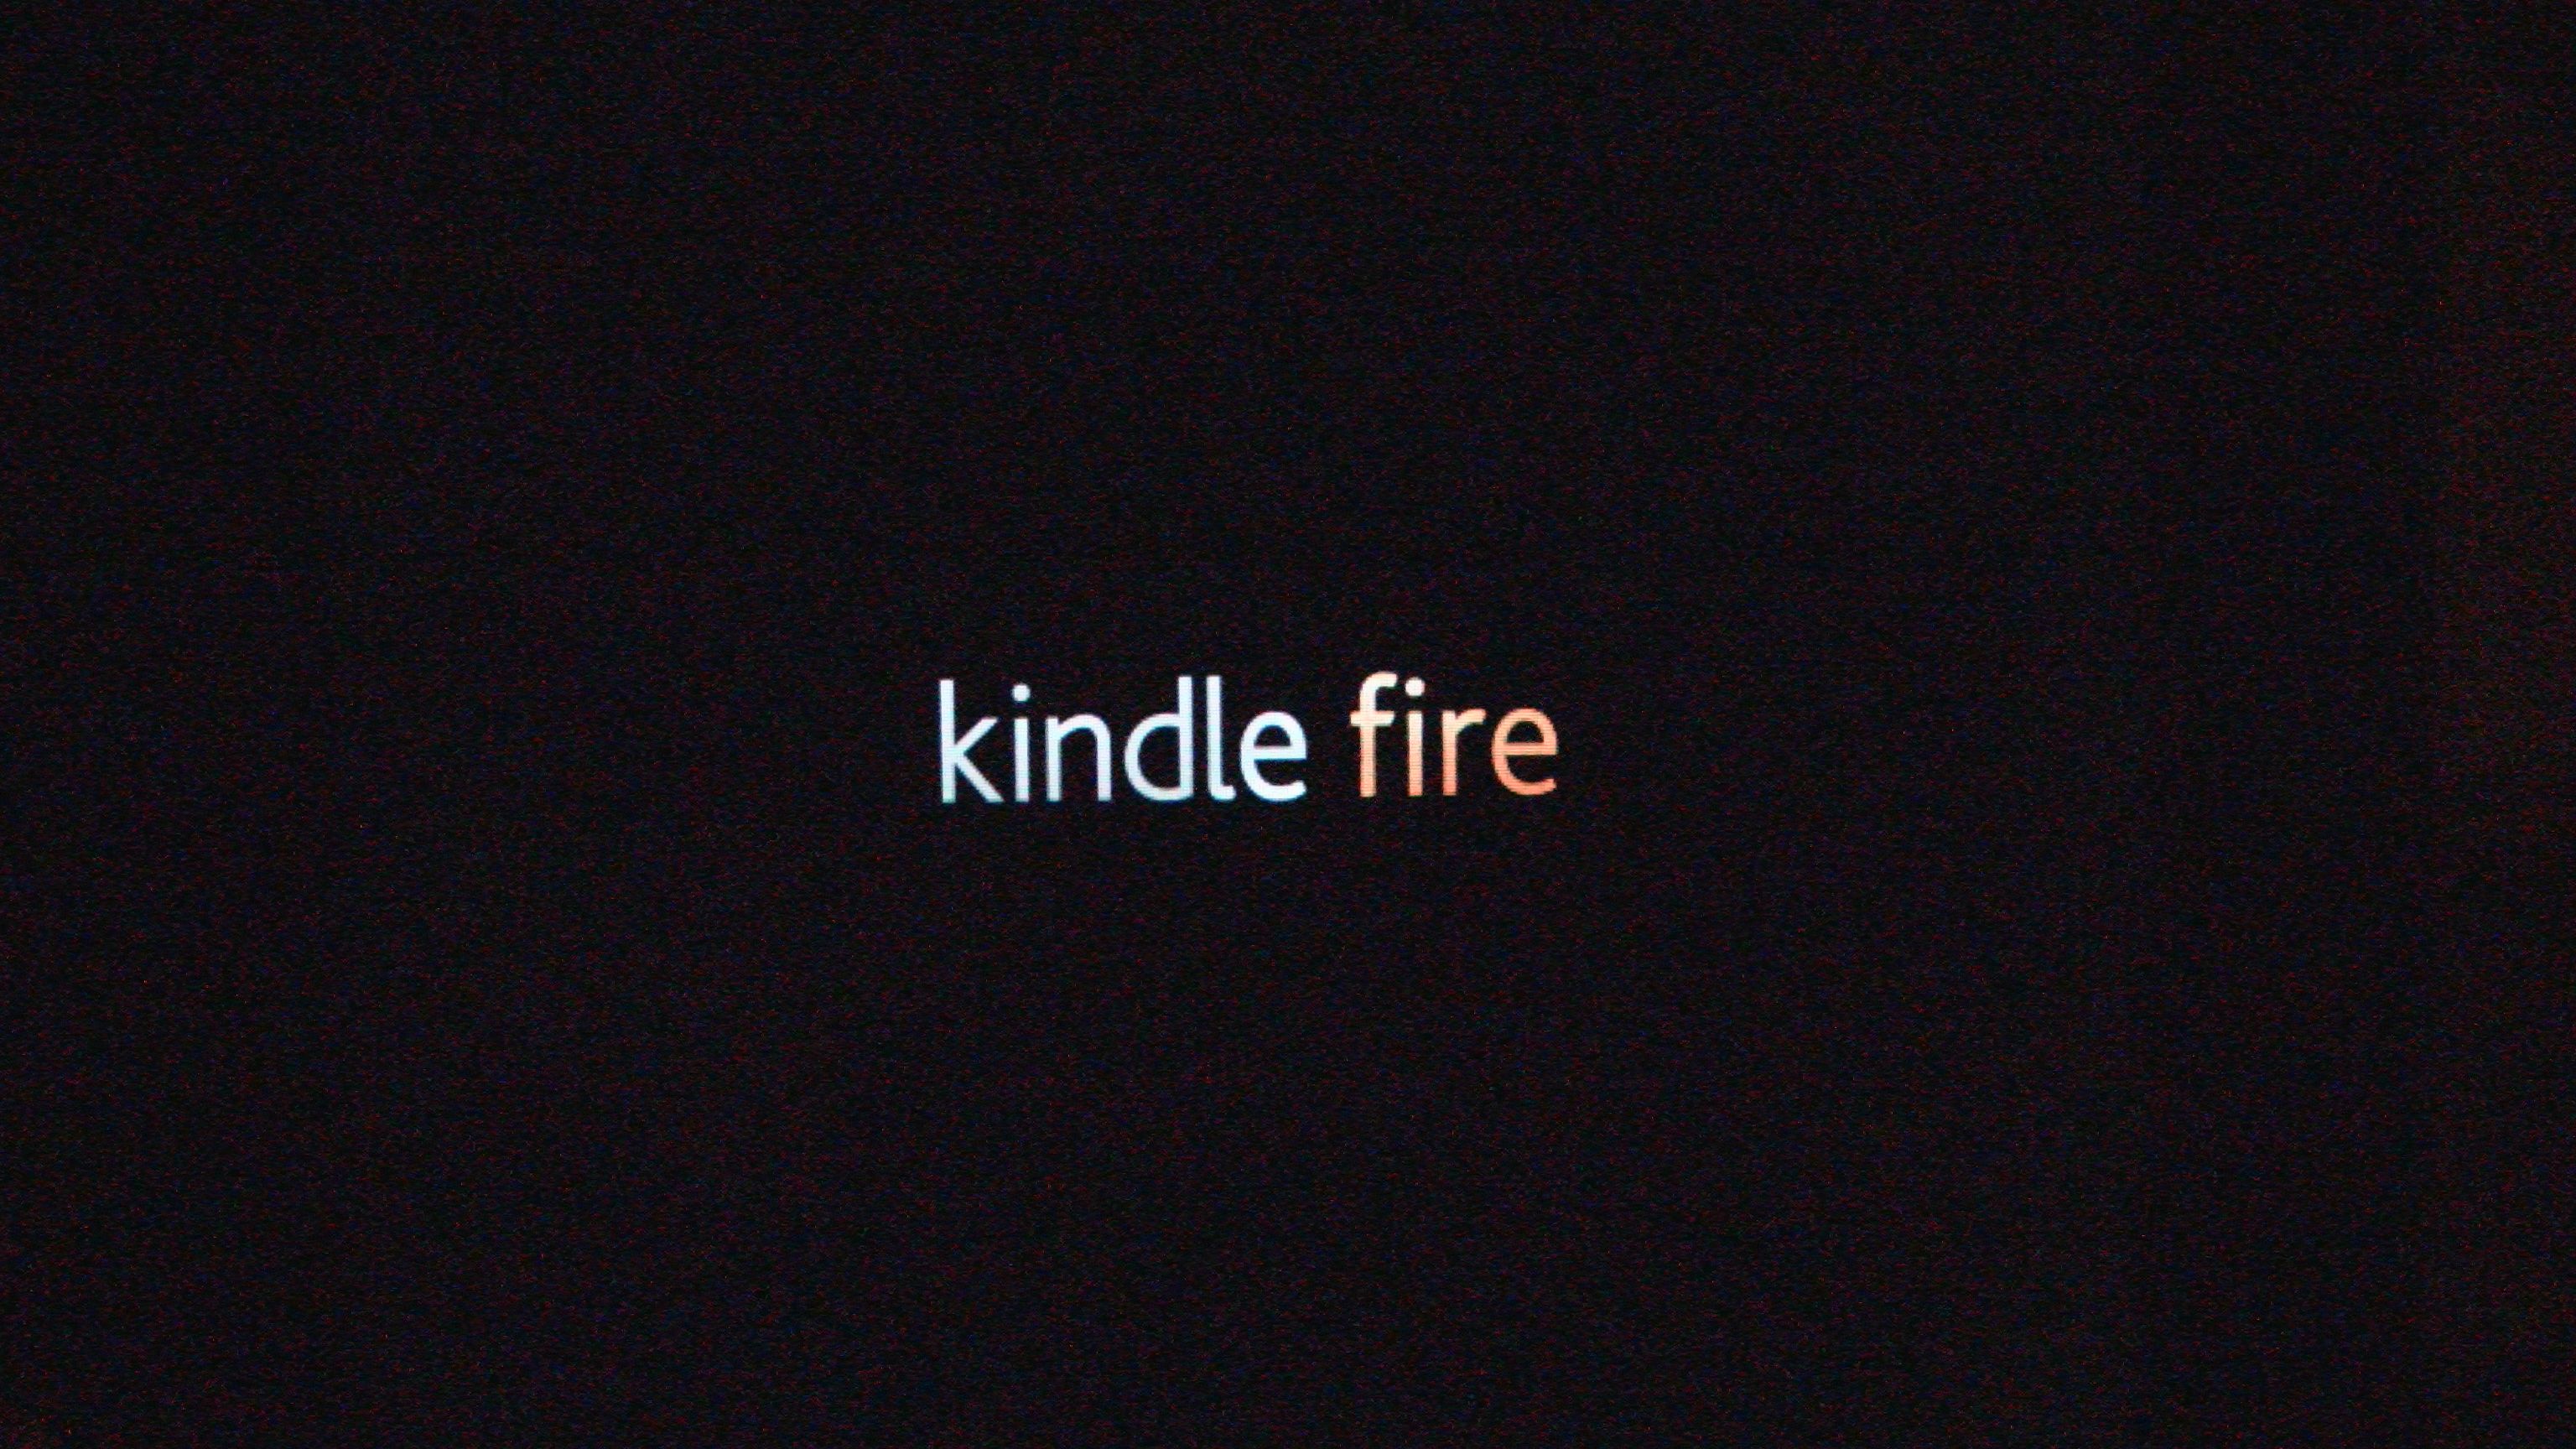 Free Download Amazons New Kindle Fire Tablet Is Hot Owner Review Booya Gadget 3072x1728 For Your Desktop Mobile Tablet Explore 49 Amazon Fire Background Wallpaper Wallpaper For Kindle Fire